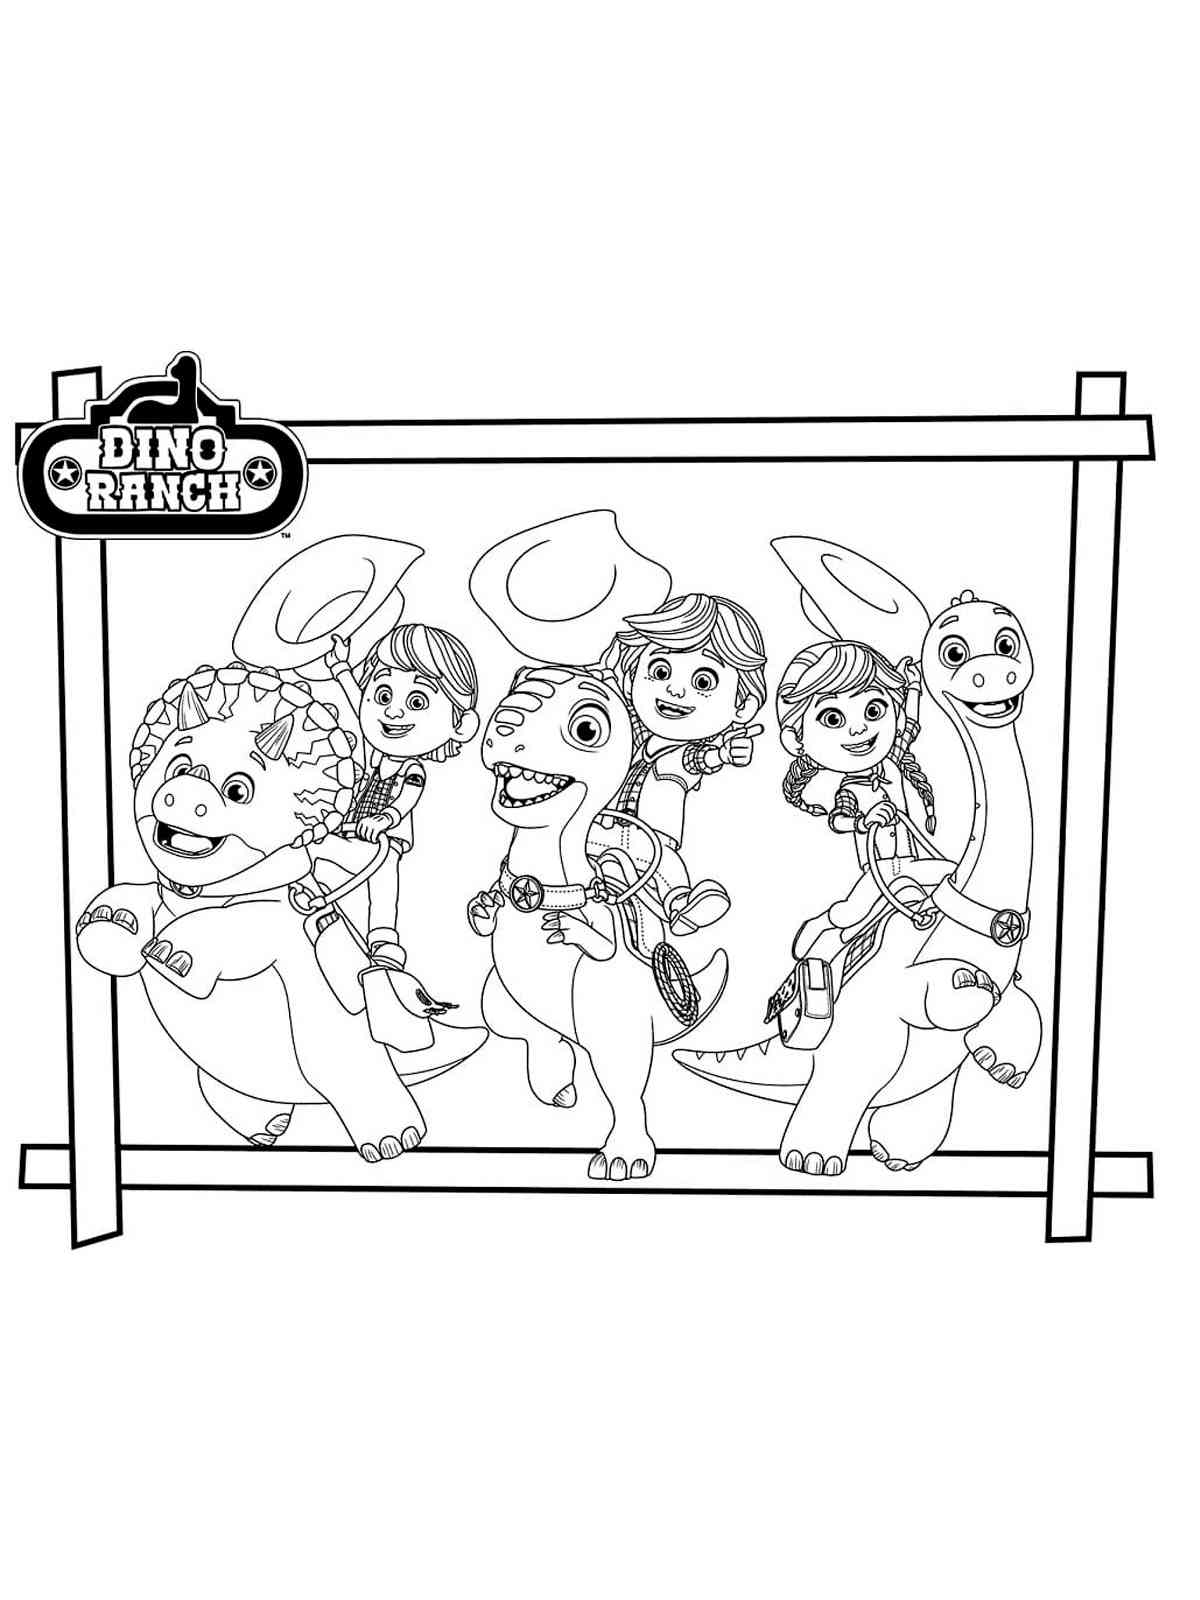 Dino Ranch 4 coloring page